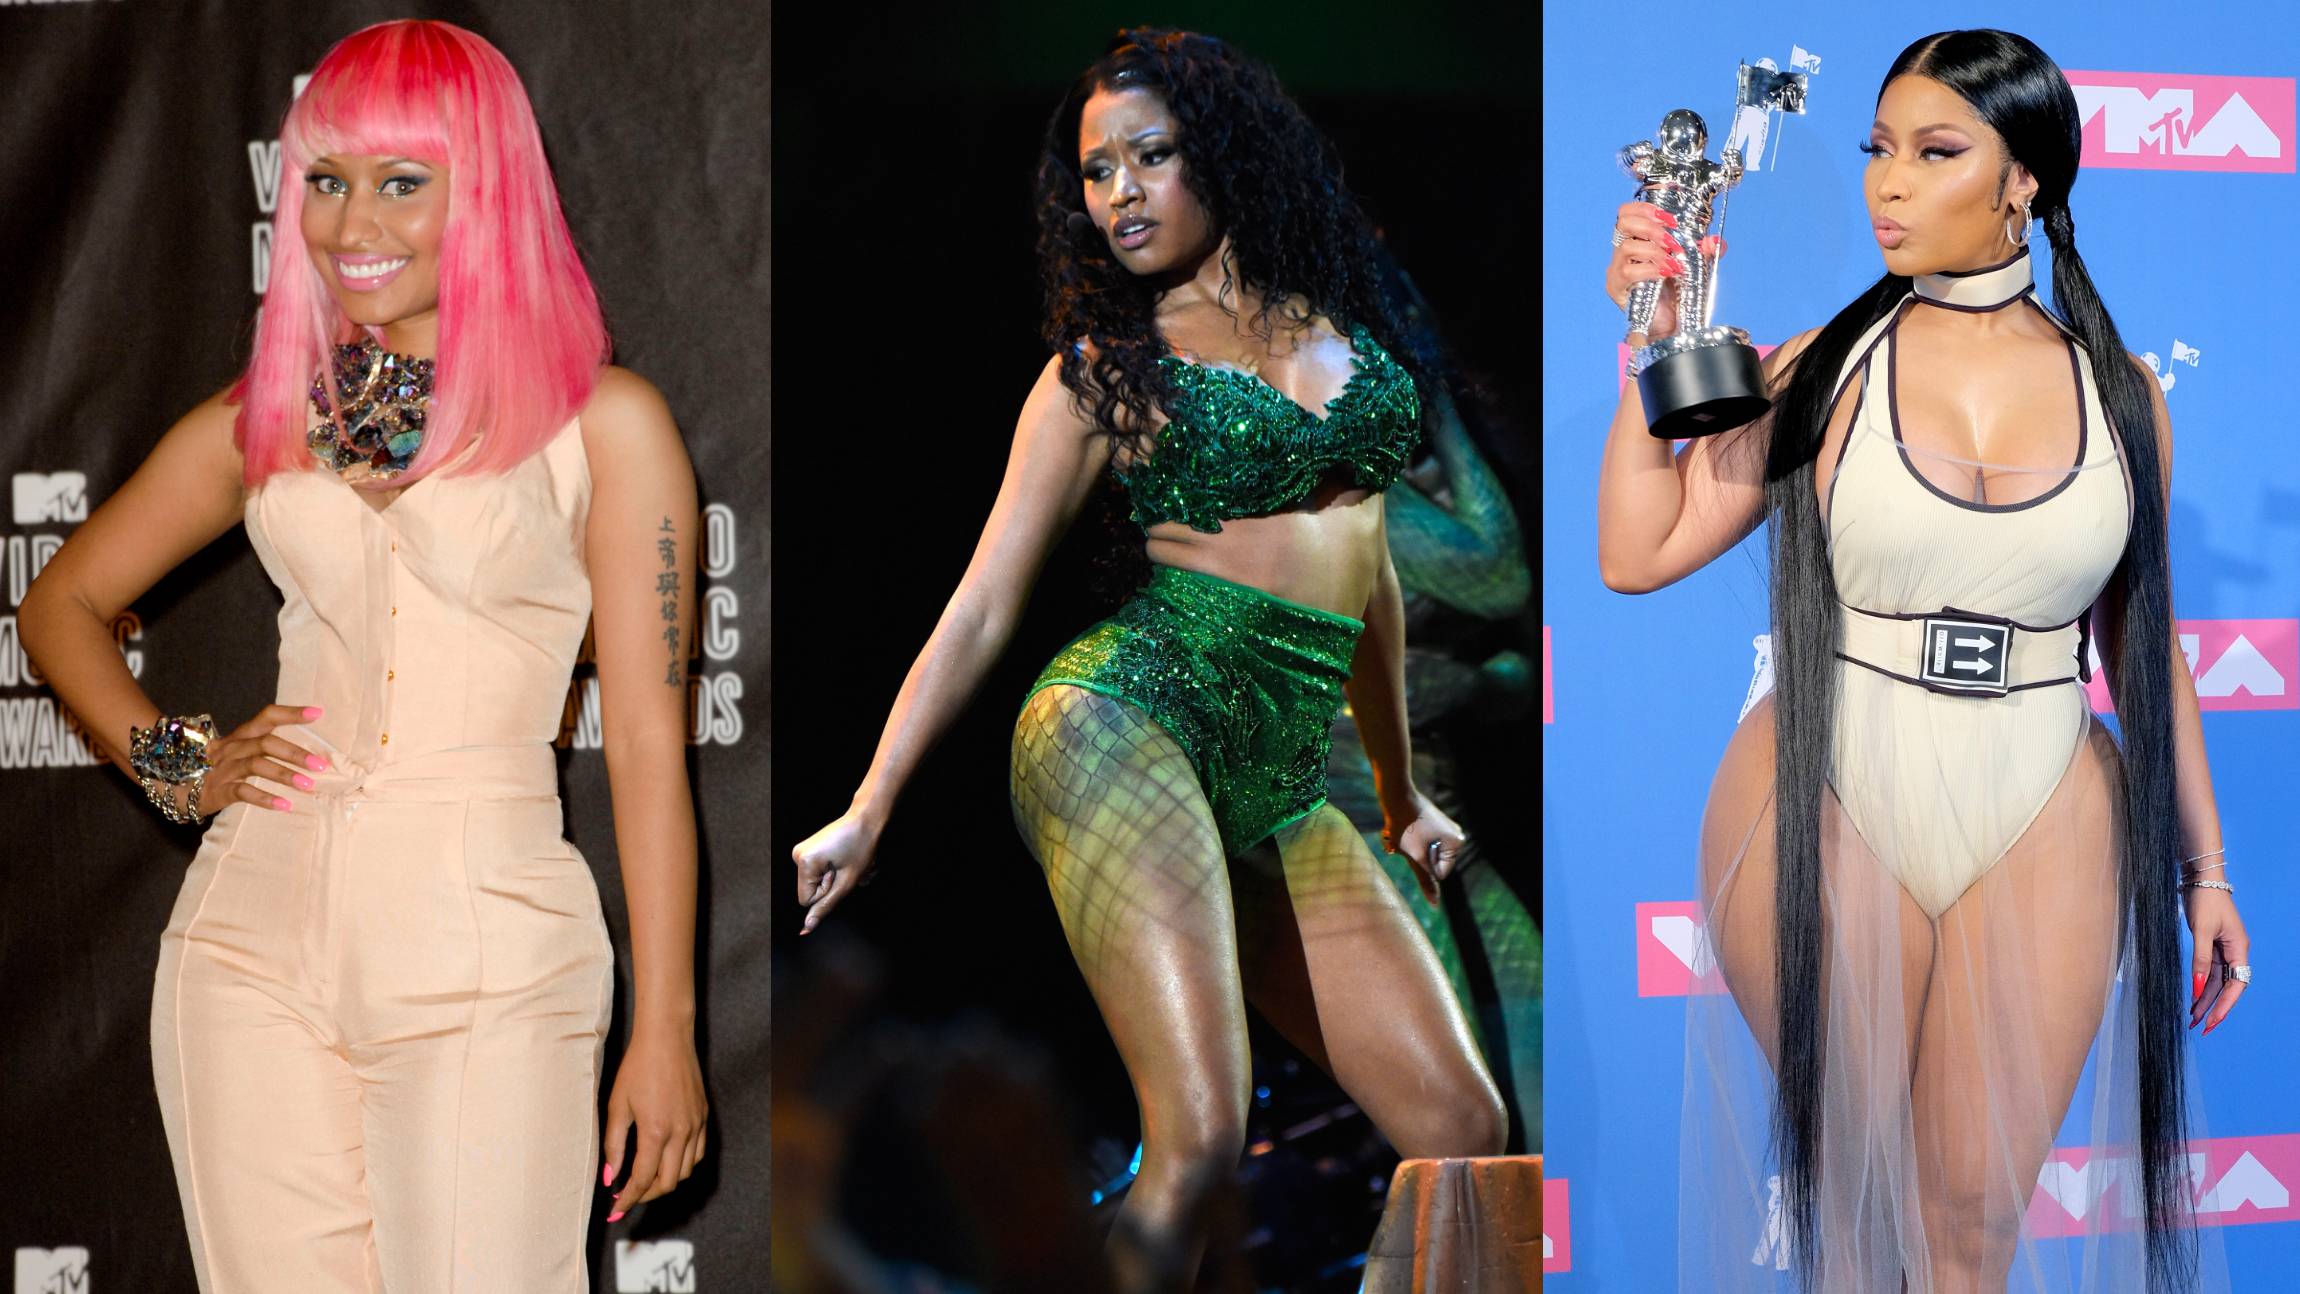 Nicki Minaj's VMA Evolution, From Pink Wigs To A Literal Golden